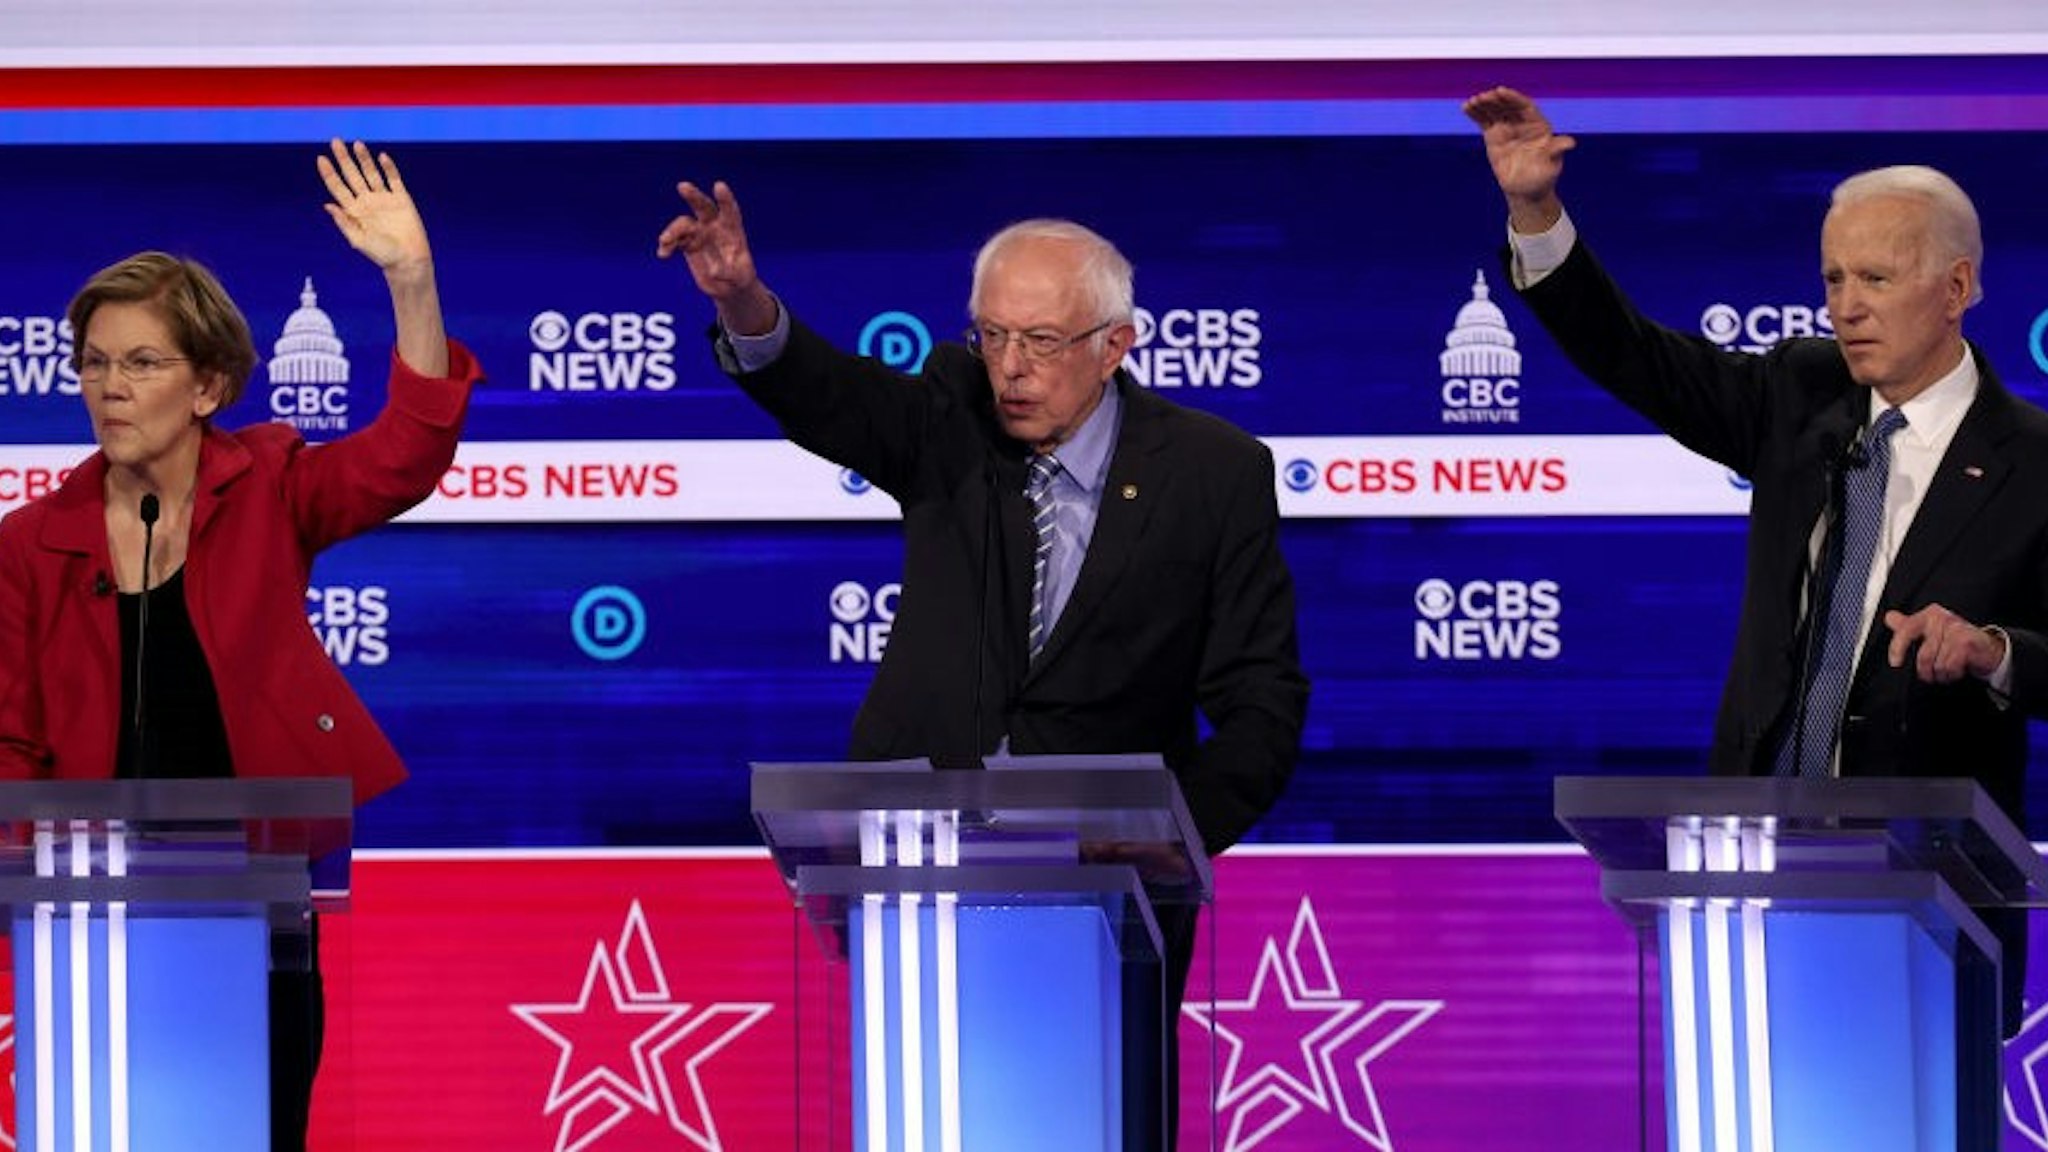 CHARLESTON, SOUTH CAROLINA - FEBRUARY 25: Democratic presidential candidates (L-R) Sen. Elizabeth Warren (D-MA), Sen. Bernie Sanders (I-VT) and former Vice President Joe Biden participate the Democratic presidential primary debate at the Charleston Gaillard Center on February 25, 2020 in Charleston, South Carolina. Seven candidates qualified for the debate, hosted by CBS News and Congressional Black Caucus Institute, ahead of South Carolina’s primary in four days. (Photo by